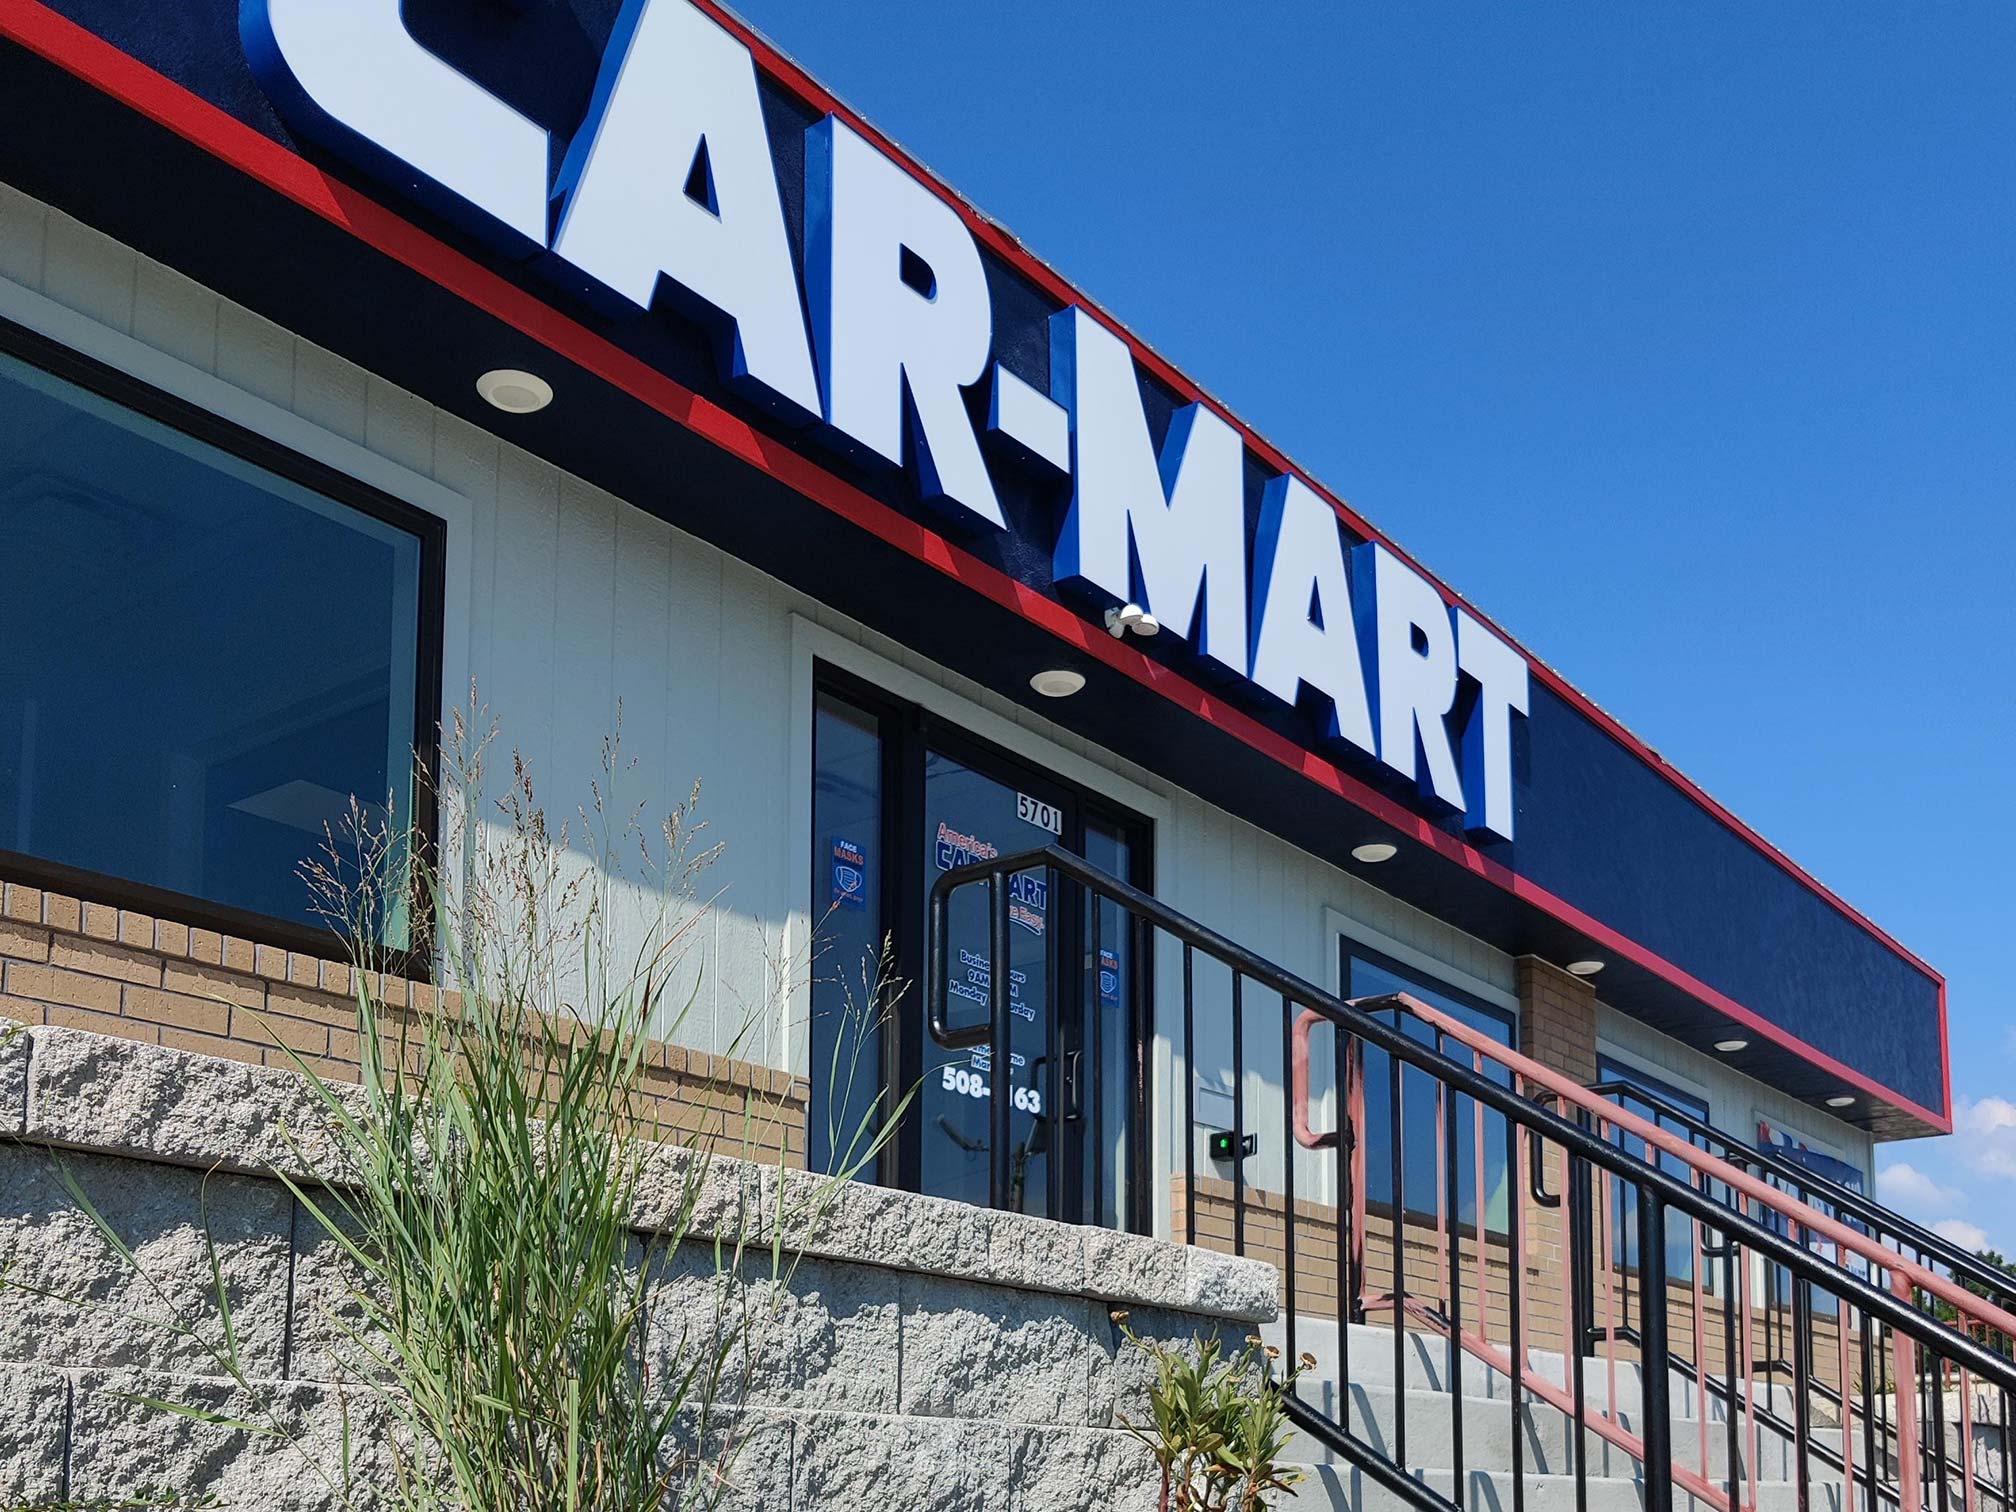 Low perspective view of stone and brick building with Car-Mart sign